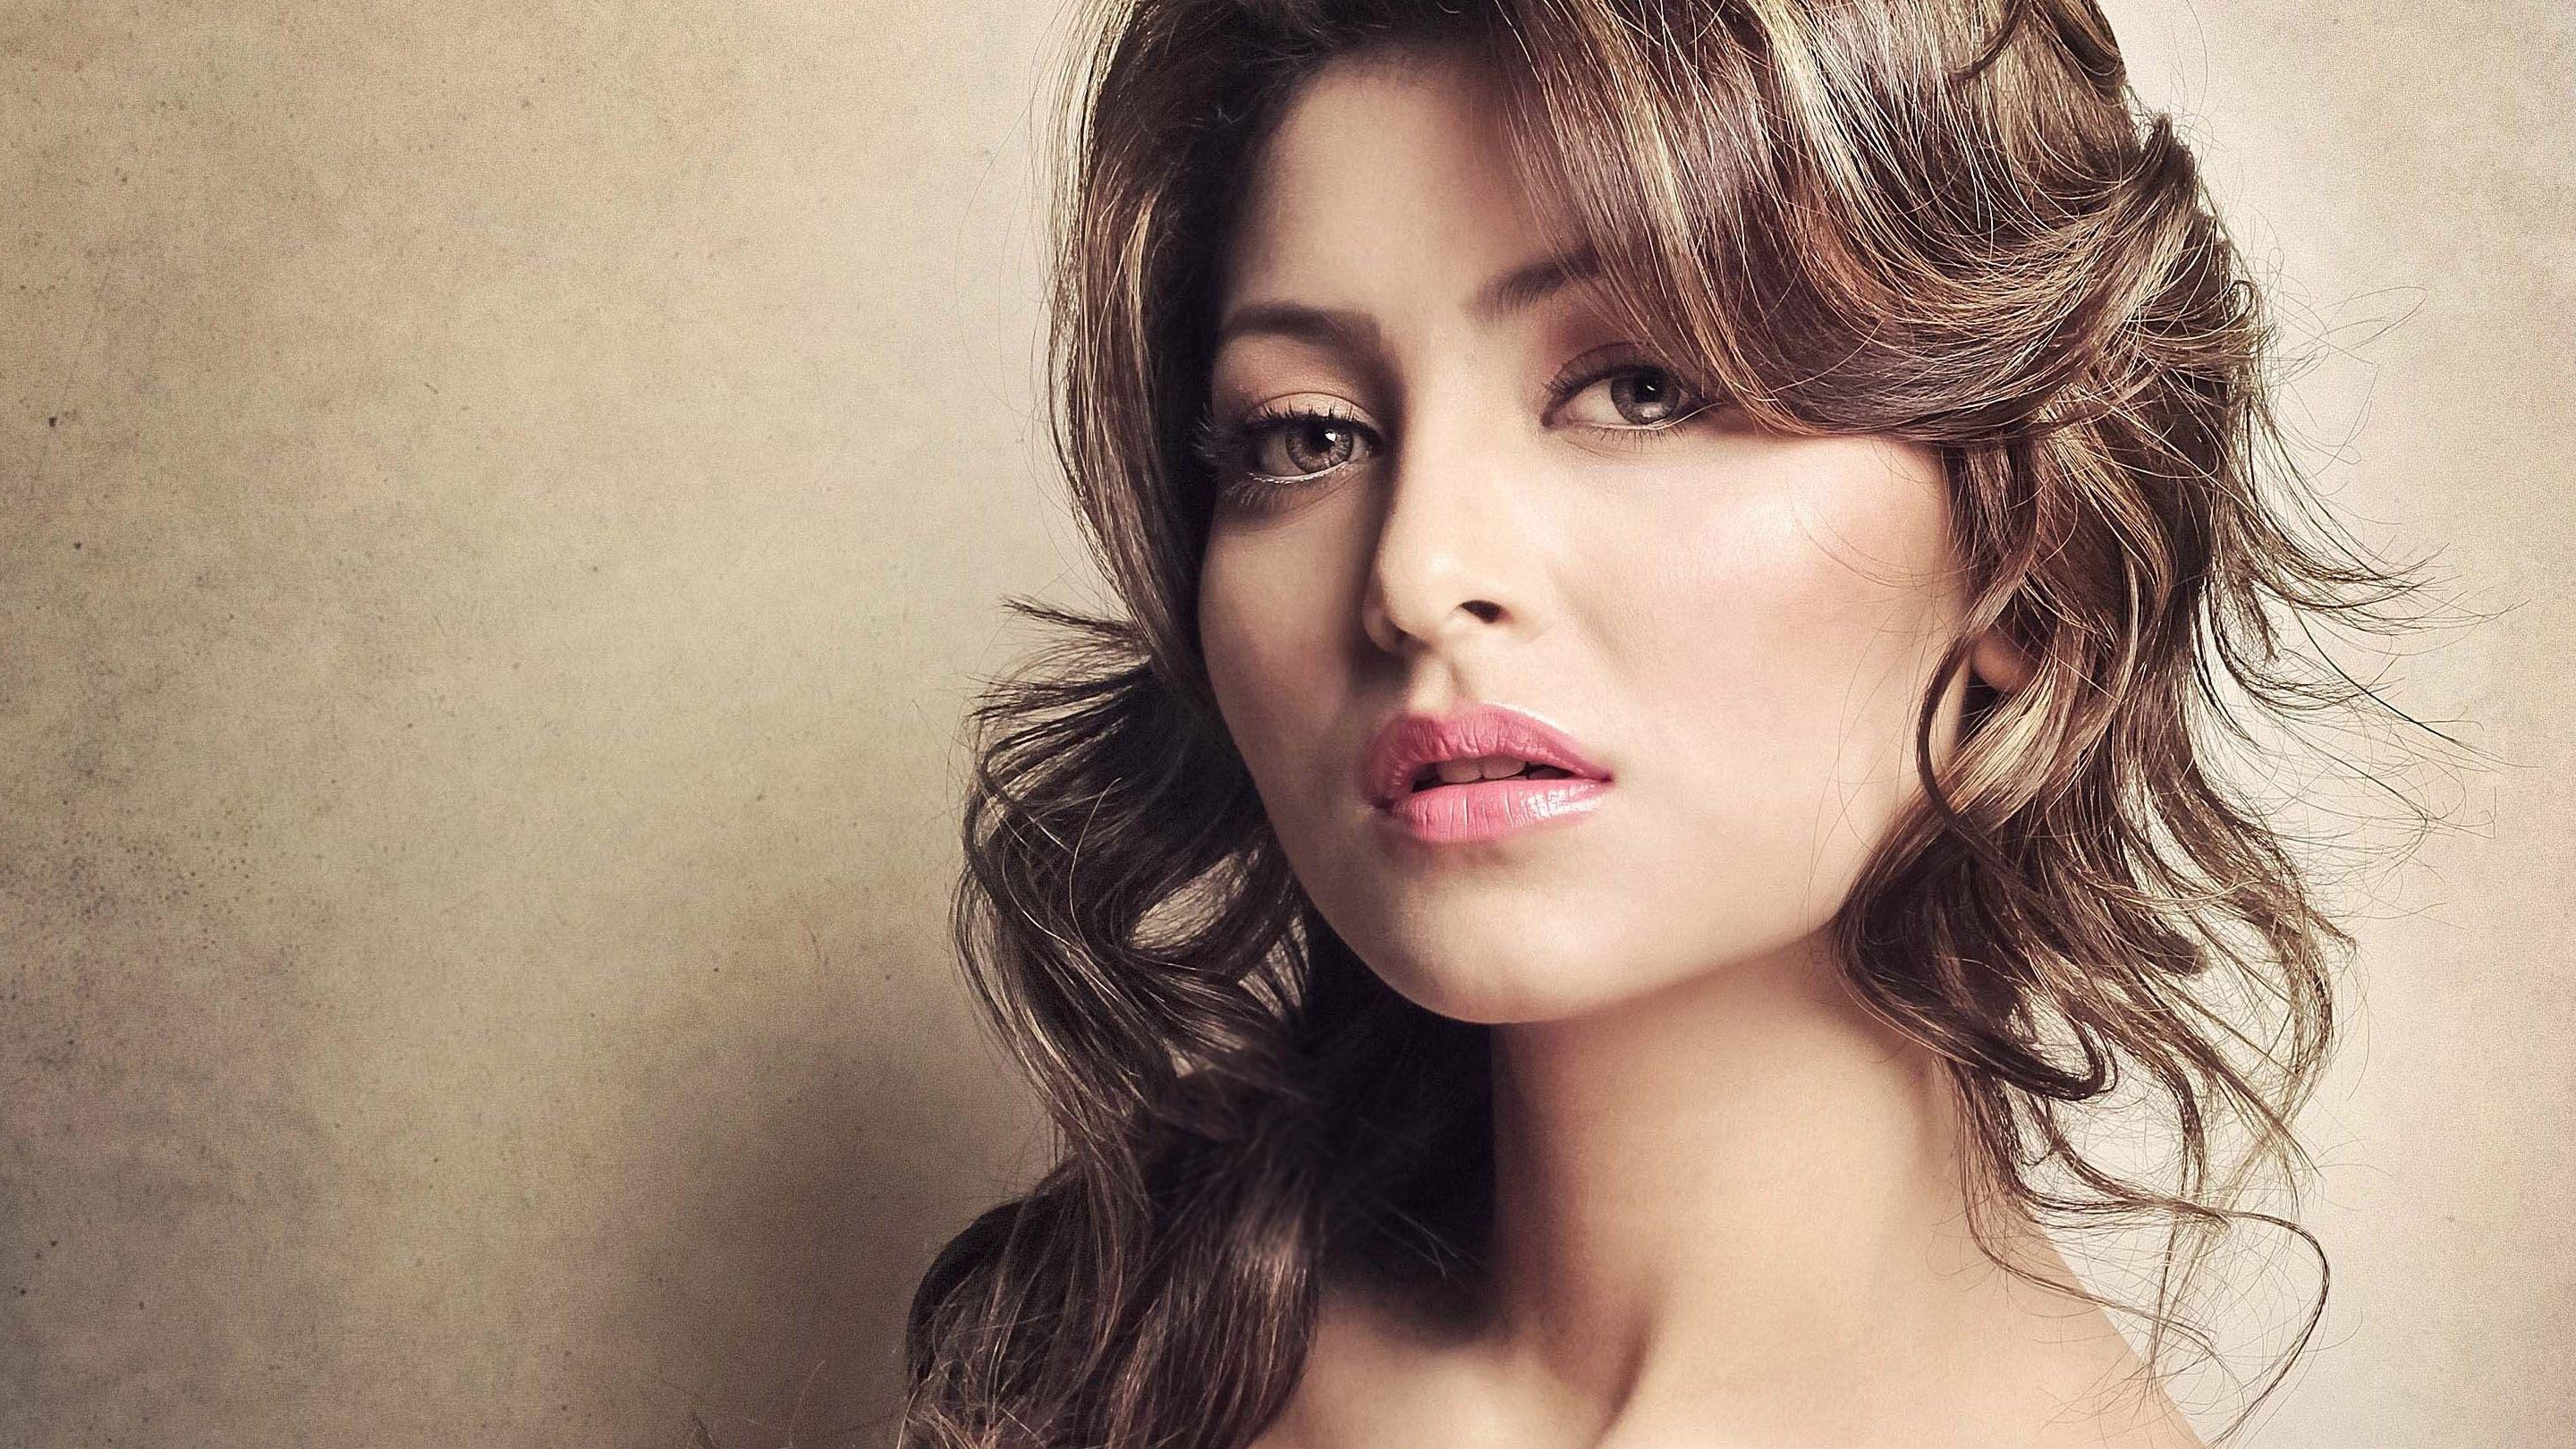 Sexy Urvashi Rautela Indian Actress Wallpaper, HD Indian Celebrities 4K  Wallpapers, Images and Background - Wallpapers Den